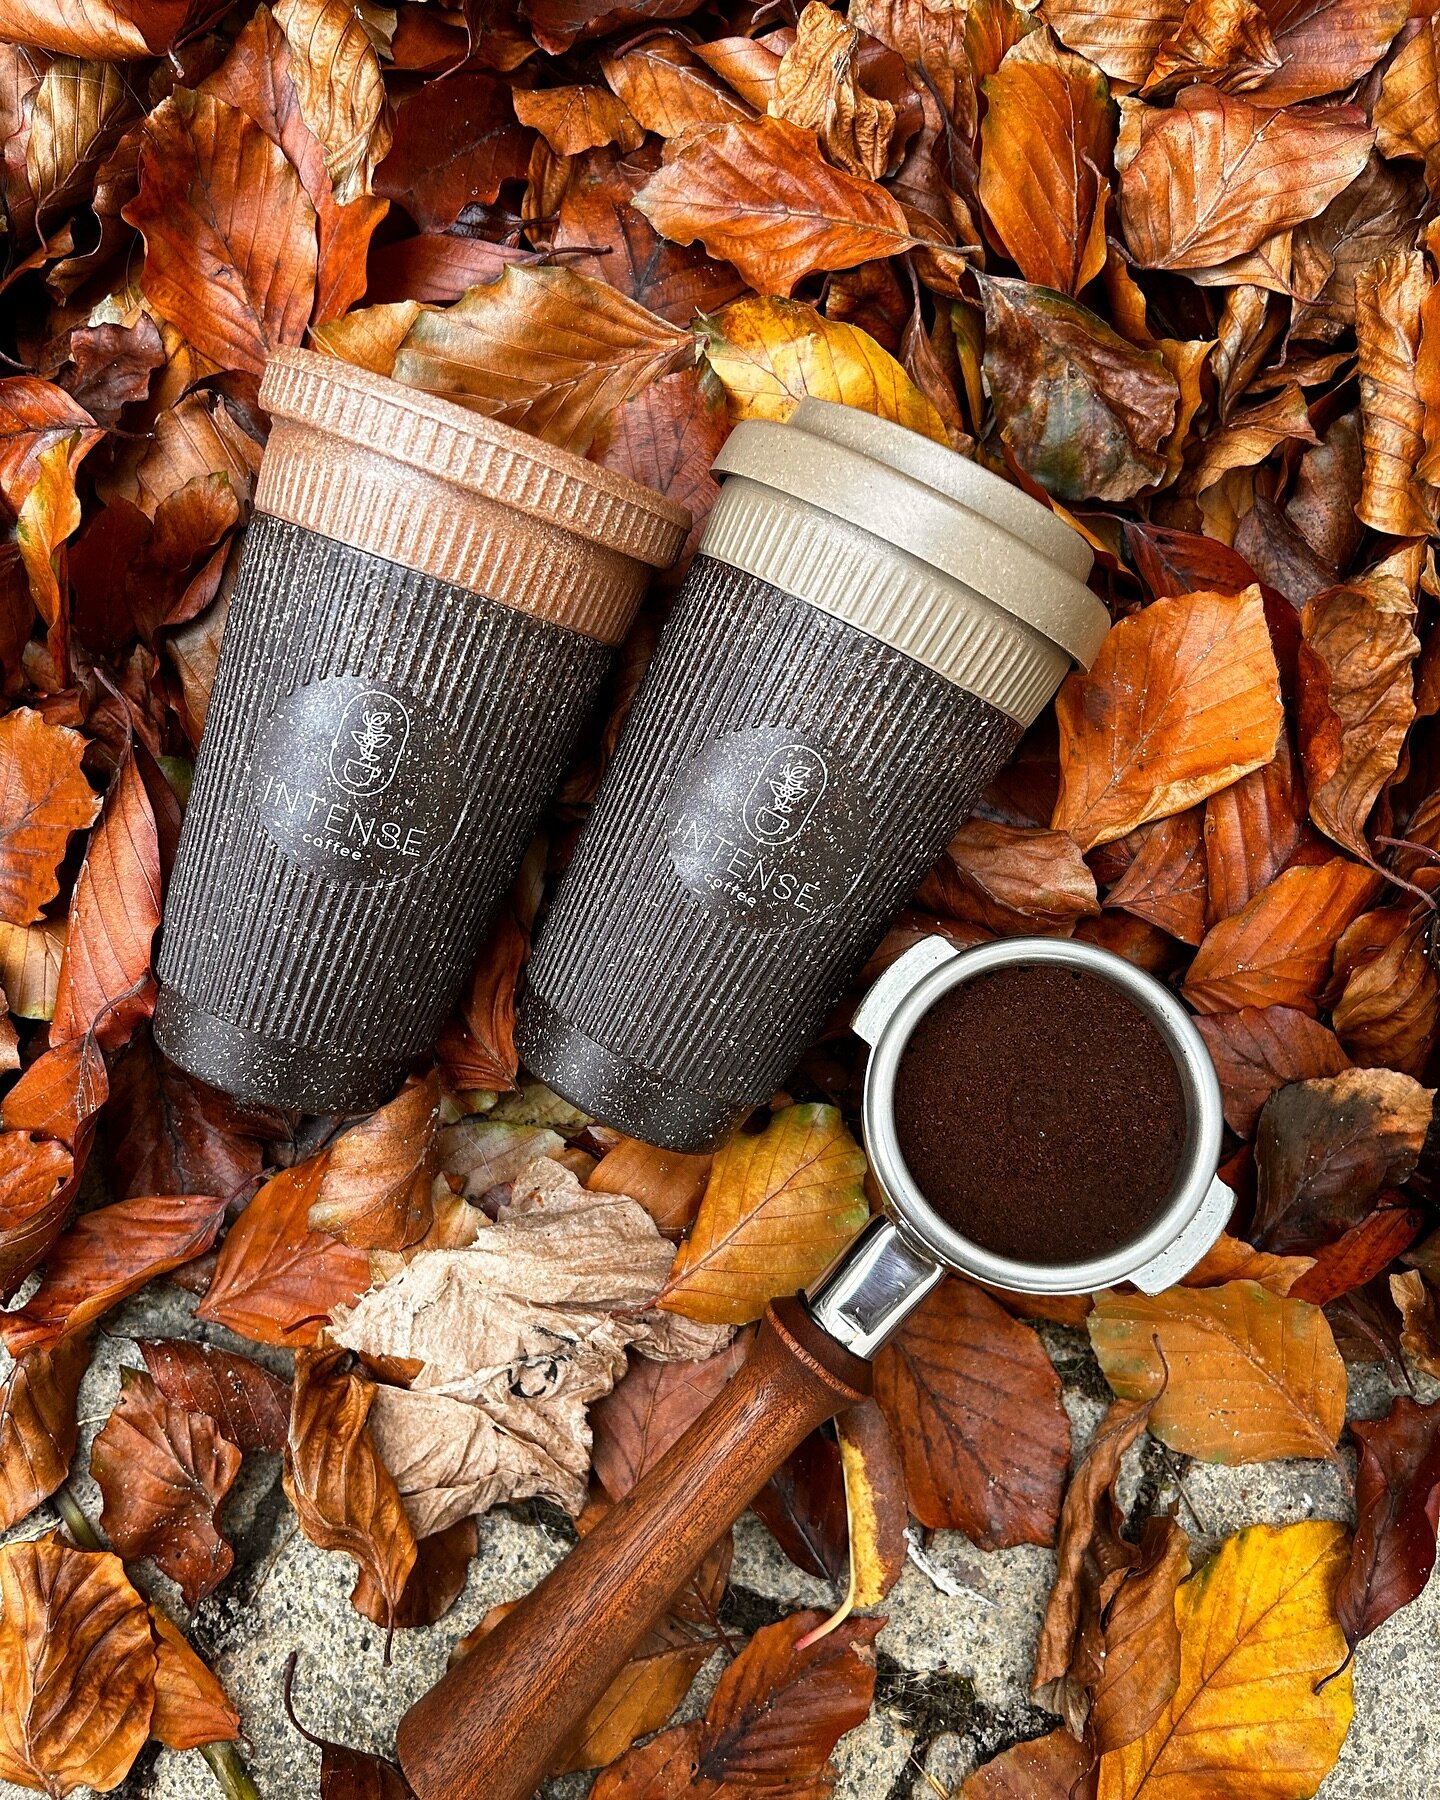 &bull;
Halli Hallo! 👋🏽
&bull;
What&lsquo;s poppin? We have news for the cozy season of the year 🍂🍁
&bull;
Grabbing a drink to-go and being sustainable at the same time has never been that sexy 😎
&bull;
These cups from @kaffeeform are made out of